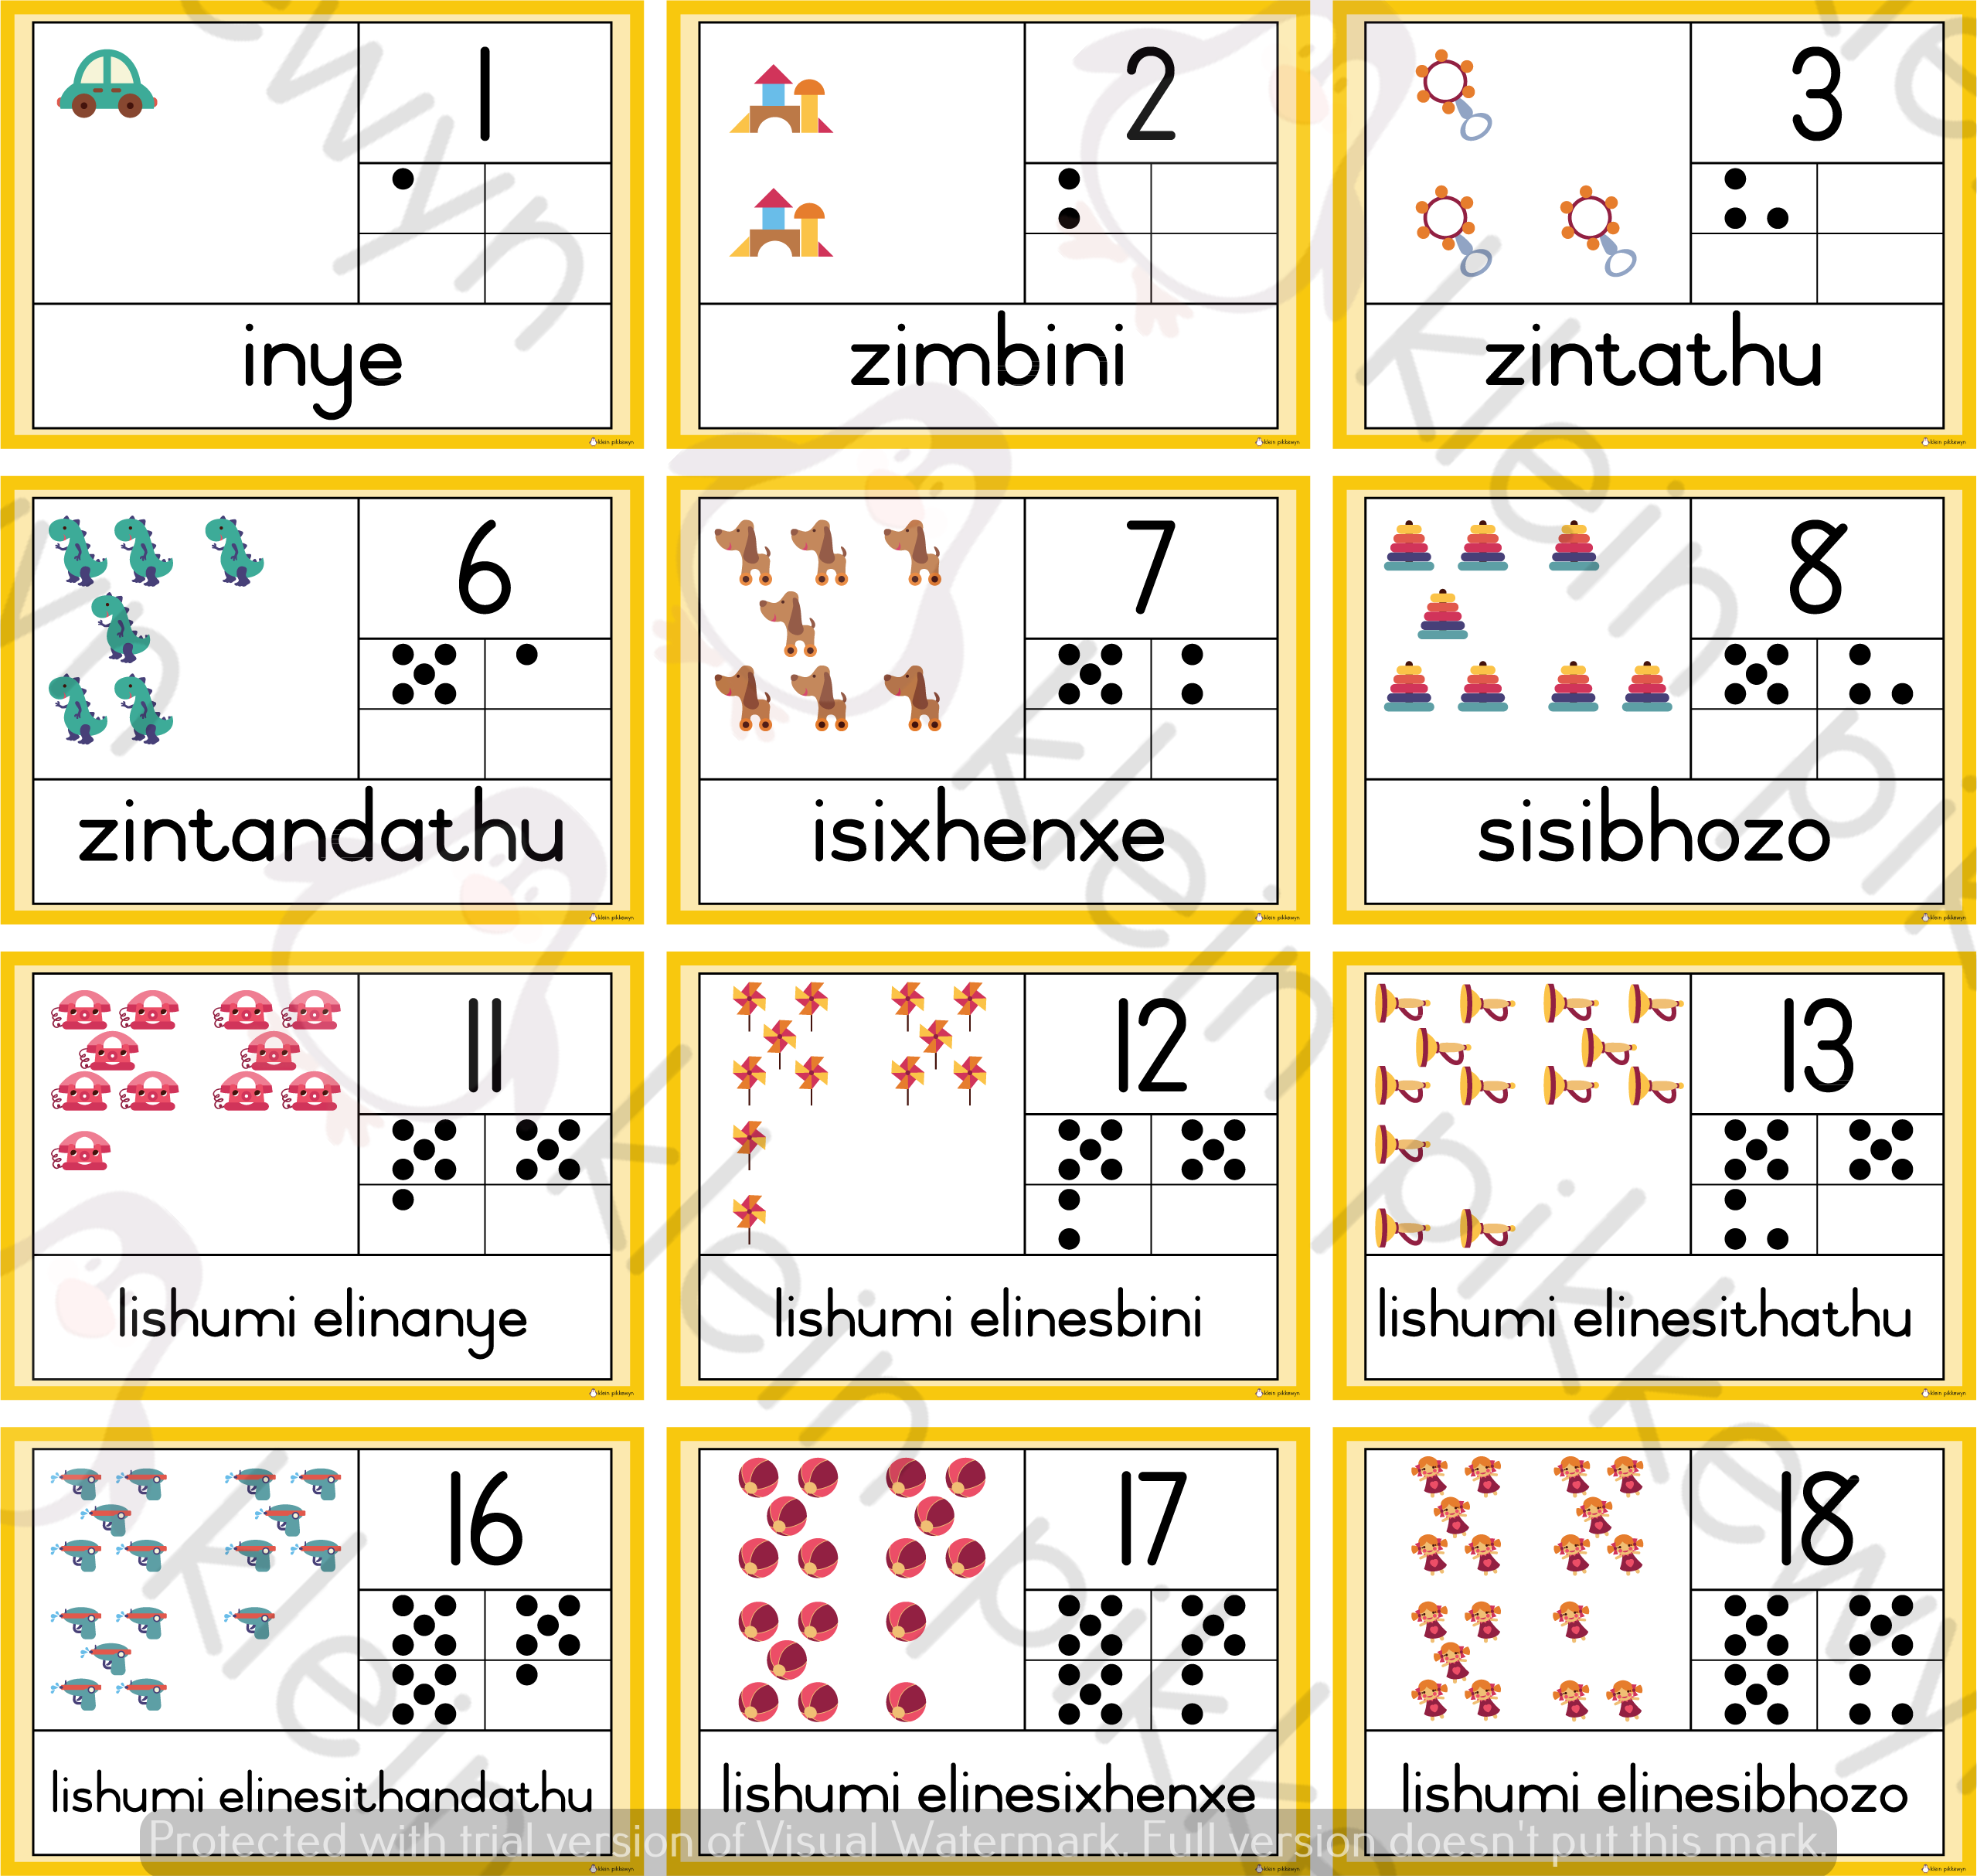 isixhosa-picture-number-dot-name-of-numbers-1-20-teacha